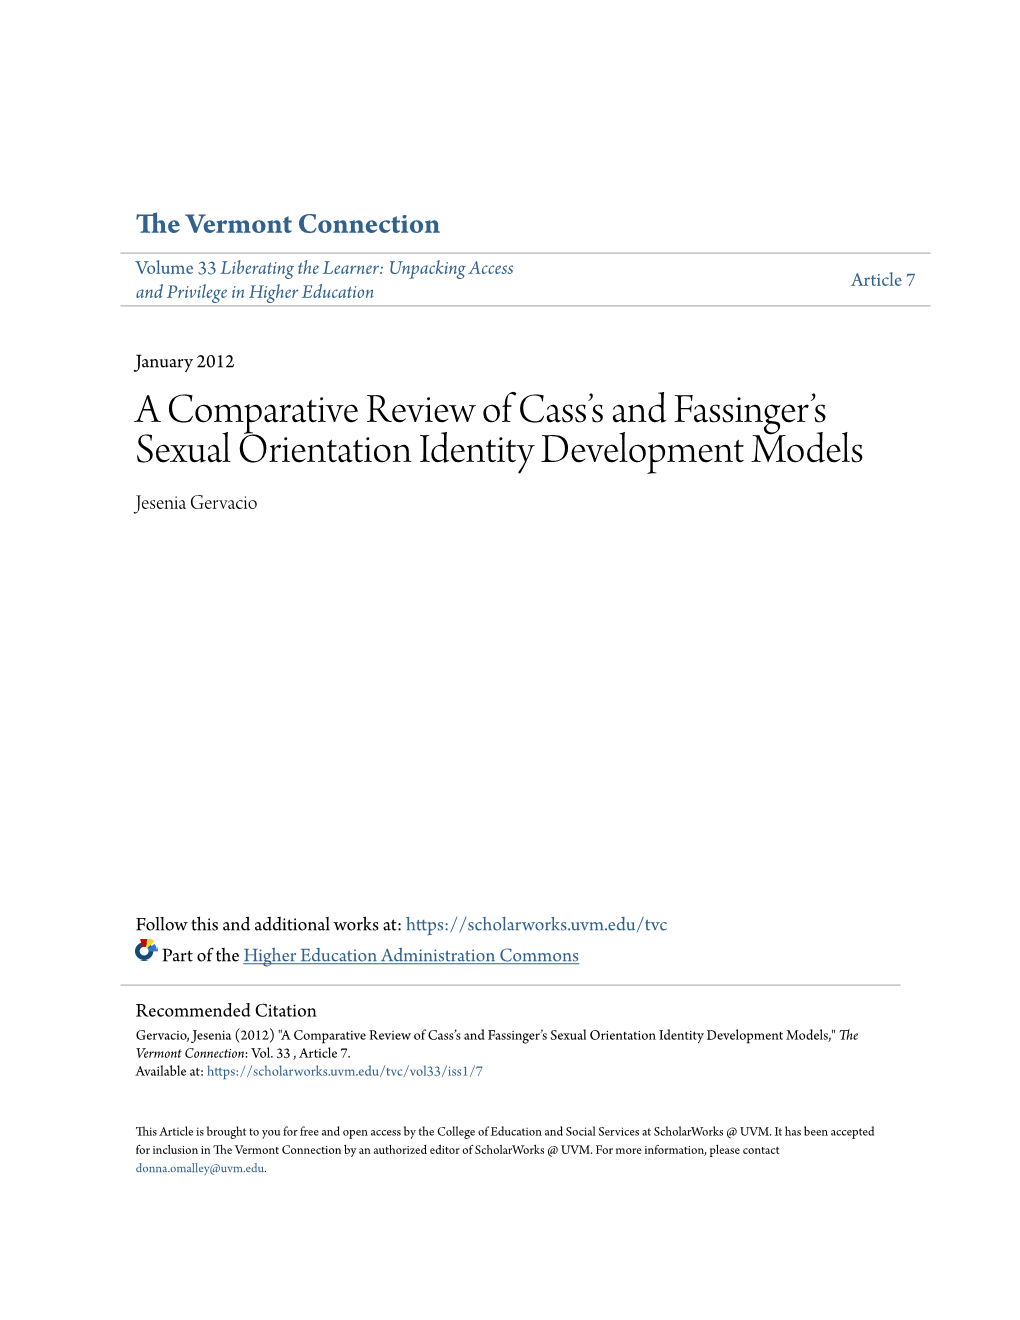 A Comparative Review of Cass's and Fassinger's Sexual Orientation Identity Development Models